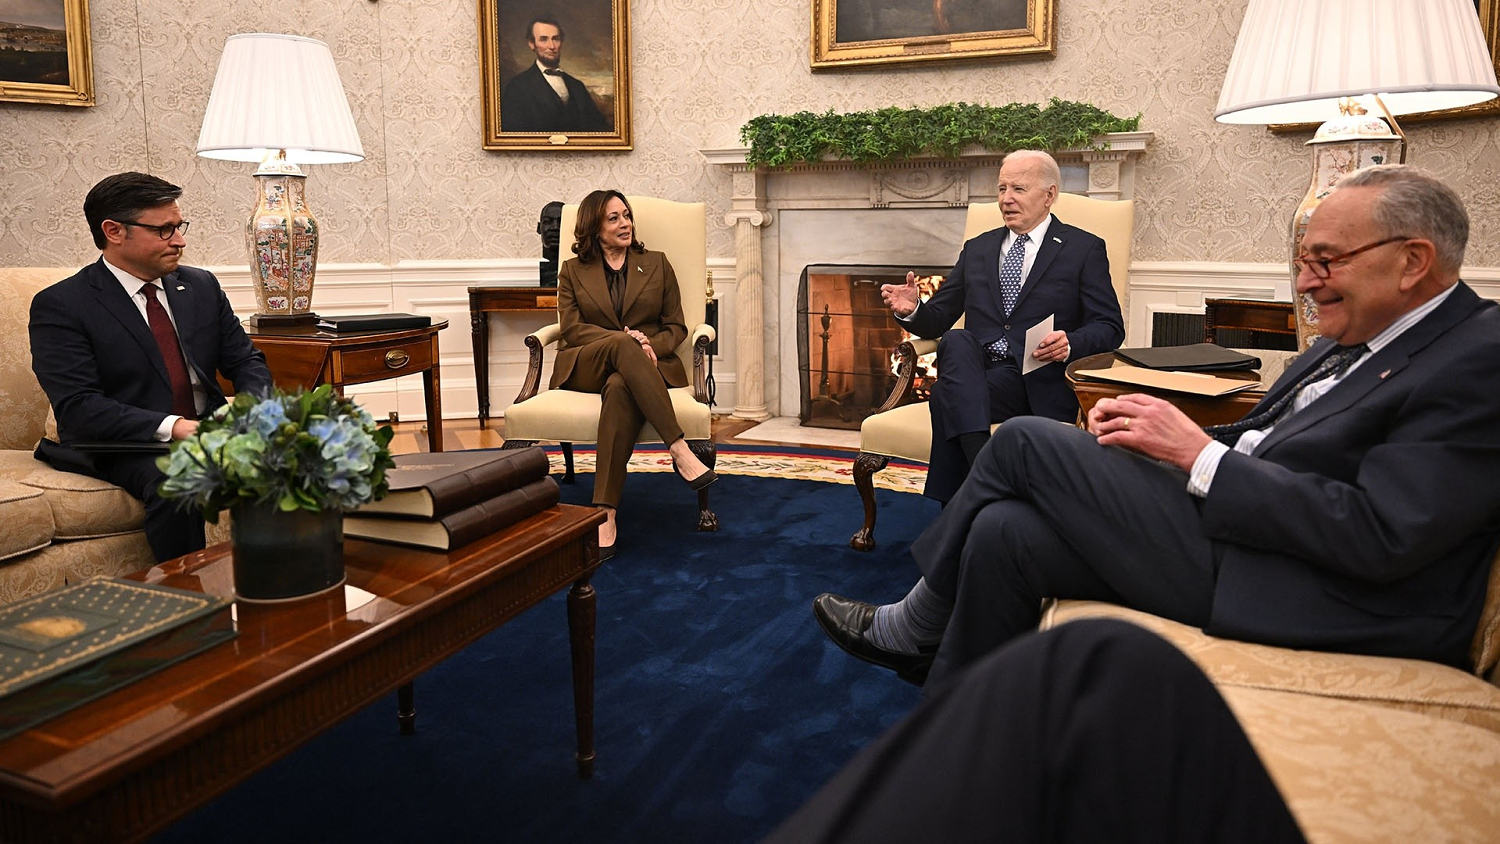 'A lot of work to do': Biden meets with congressional leaders at the White House